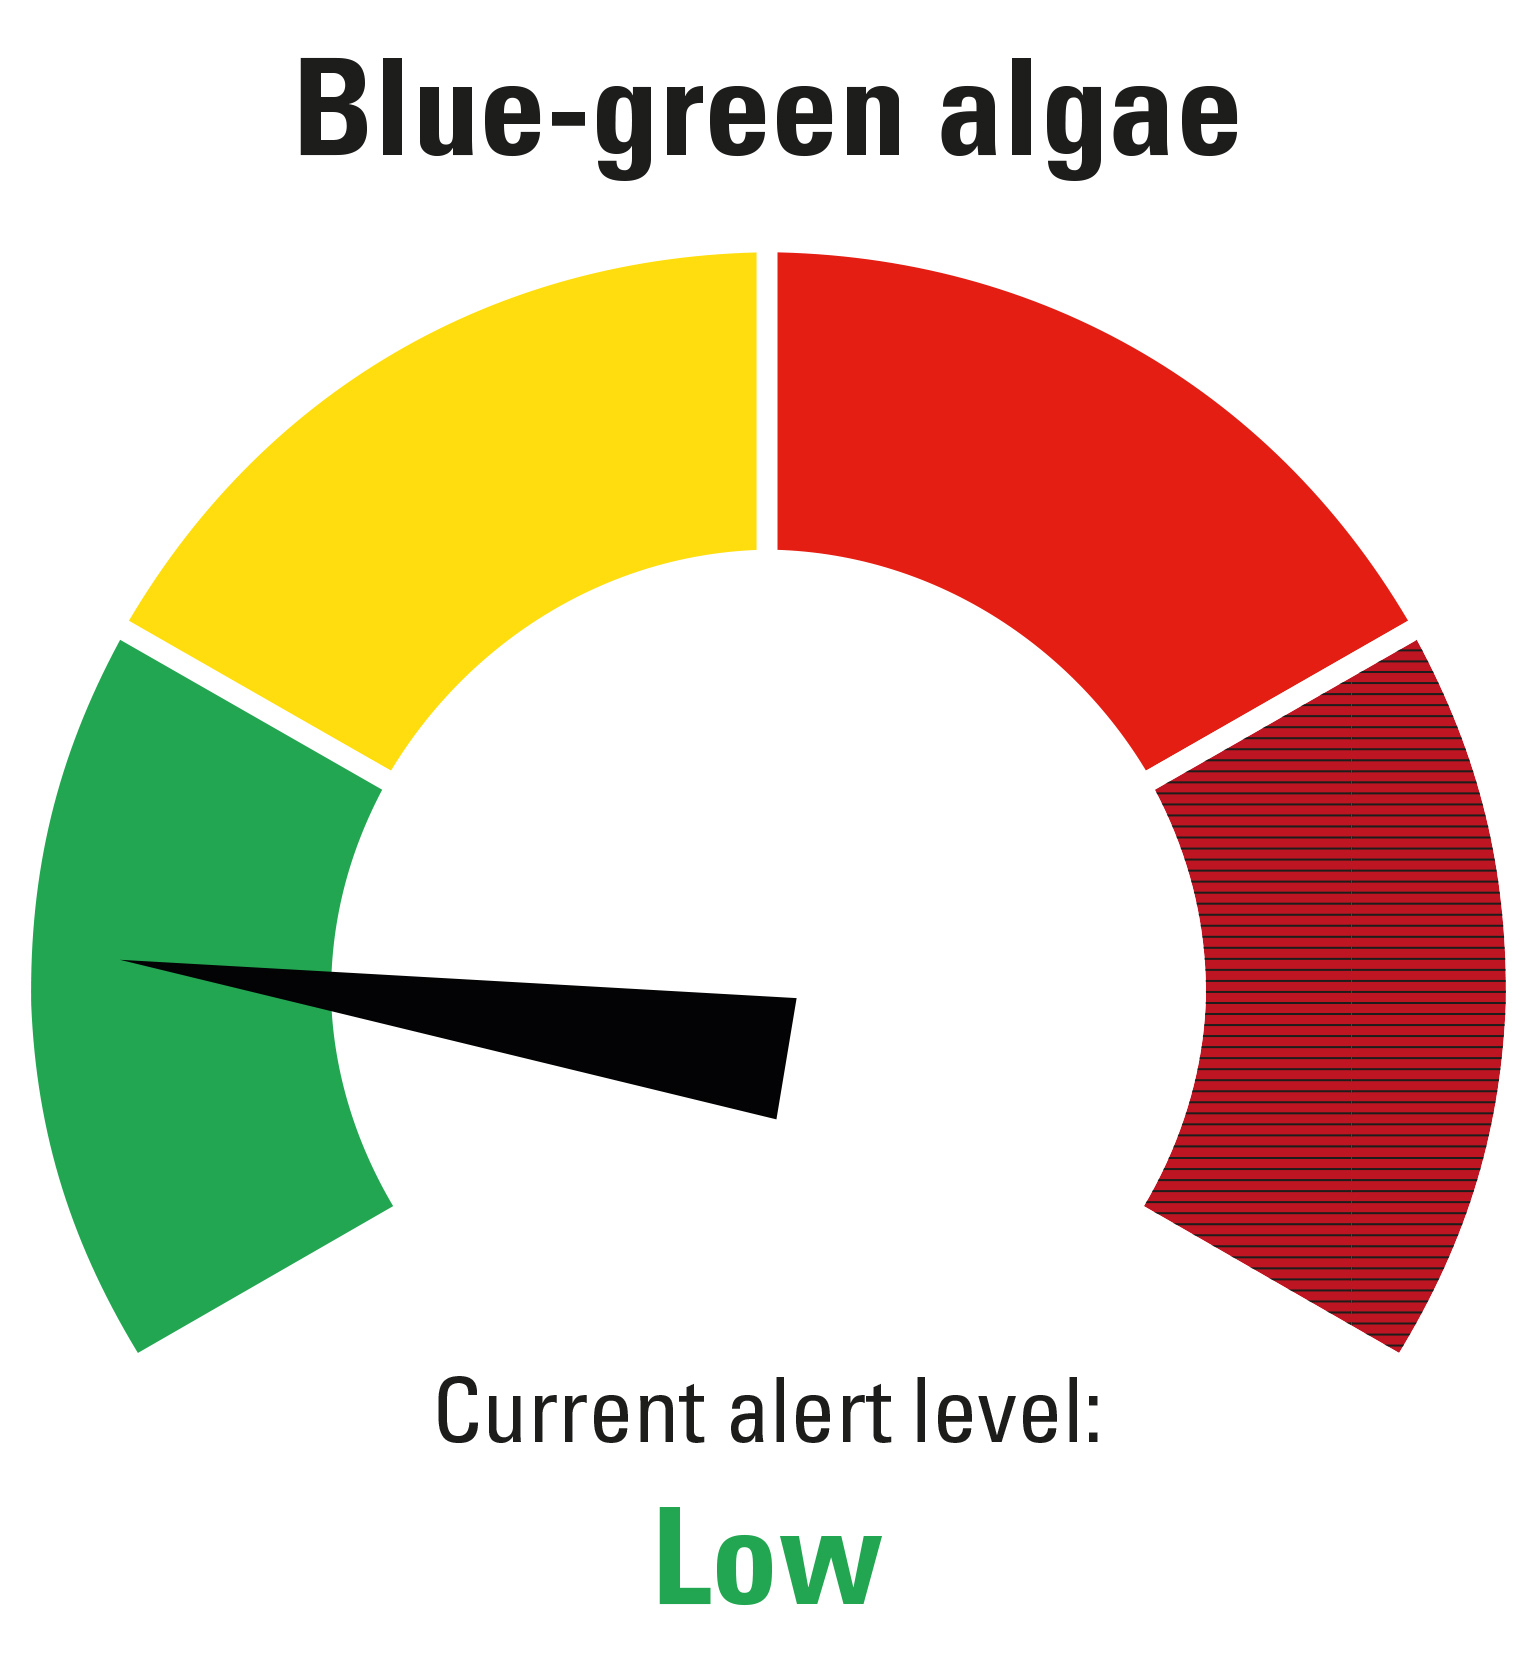 A dial that goes left to right from green to red. Arrow is pointing to green which means low